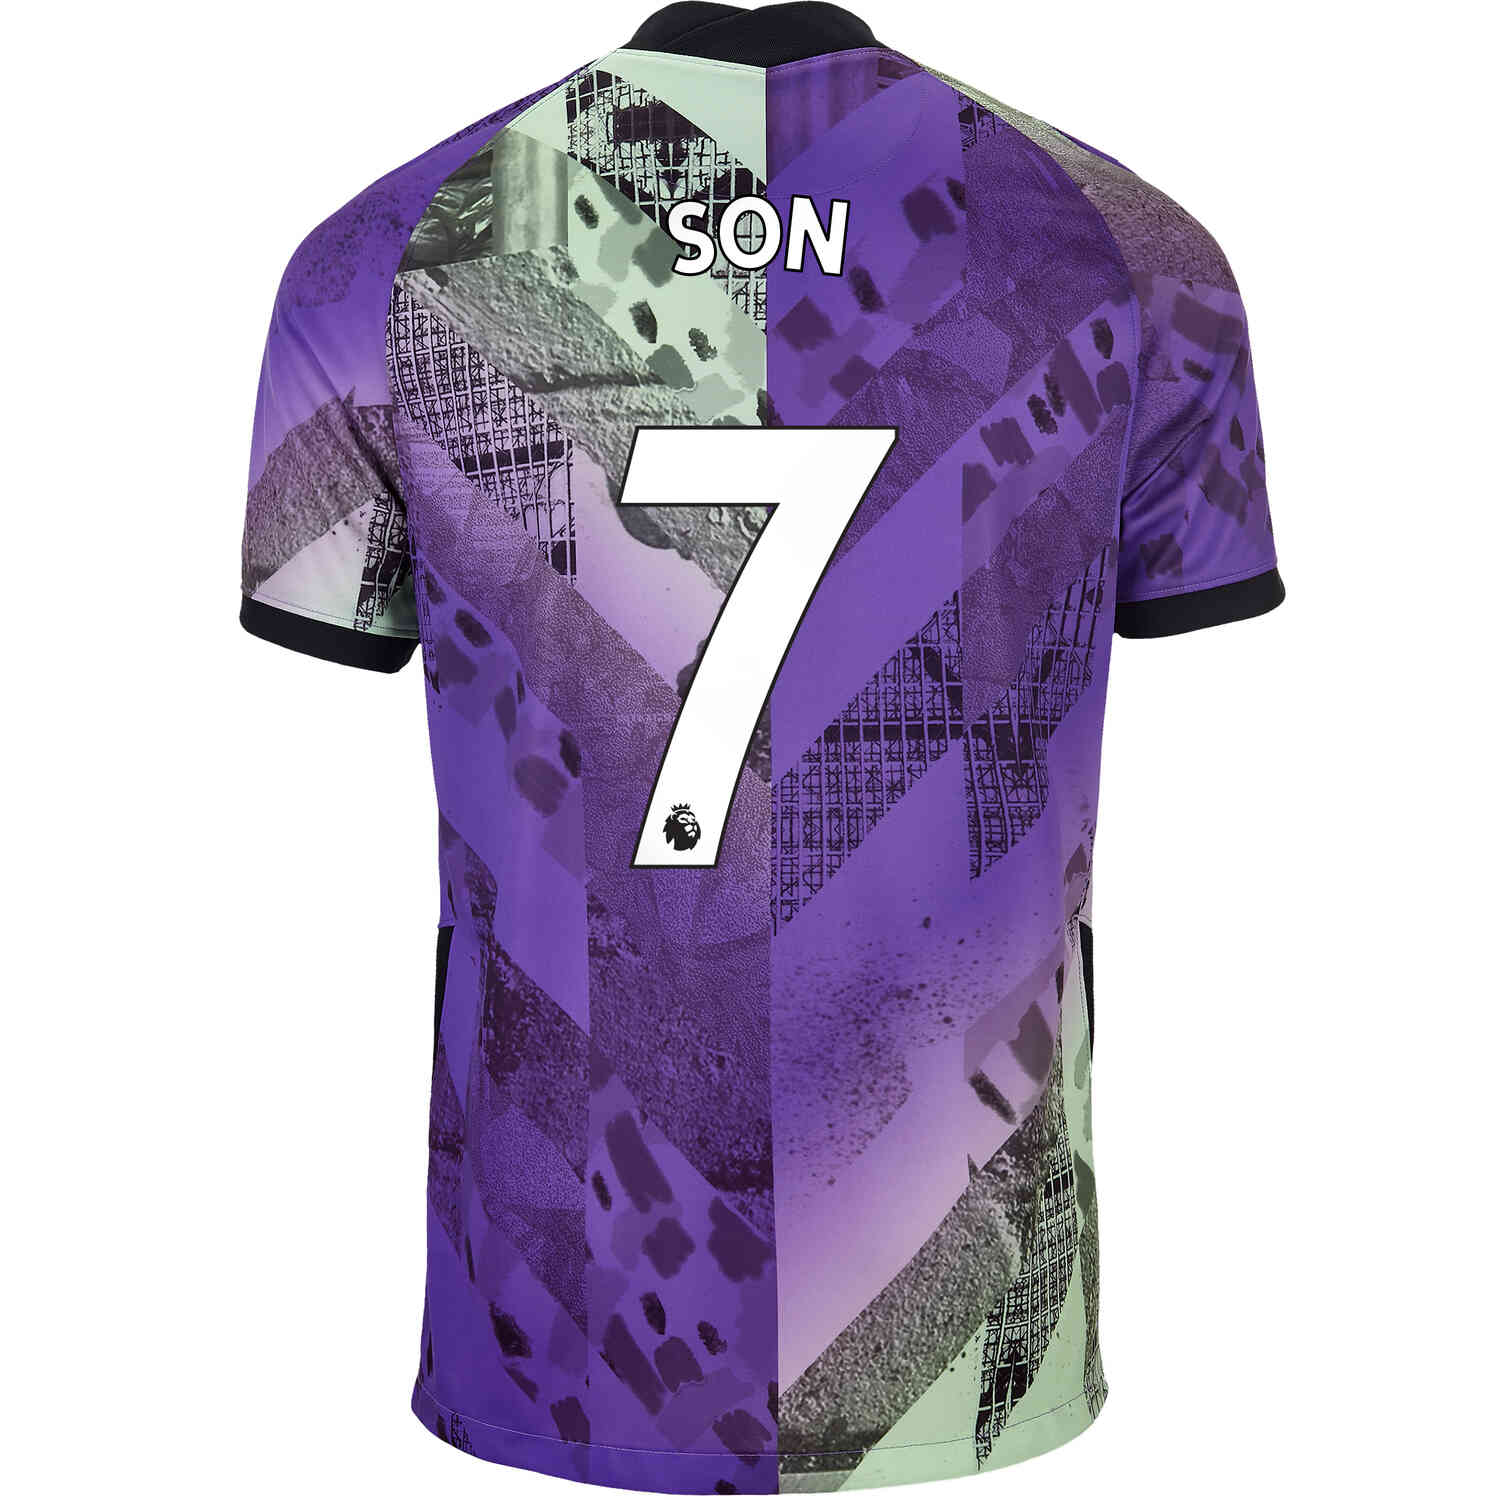 son soccer player jersey